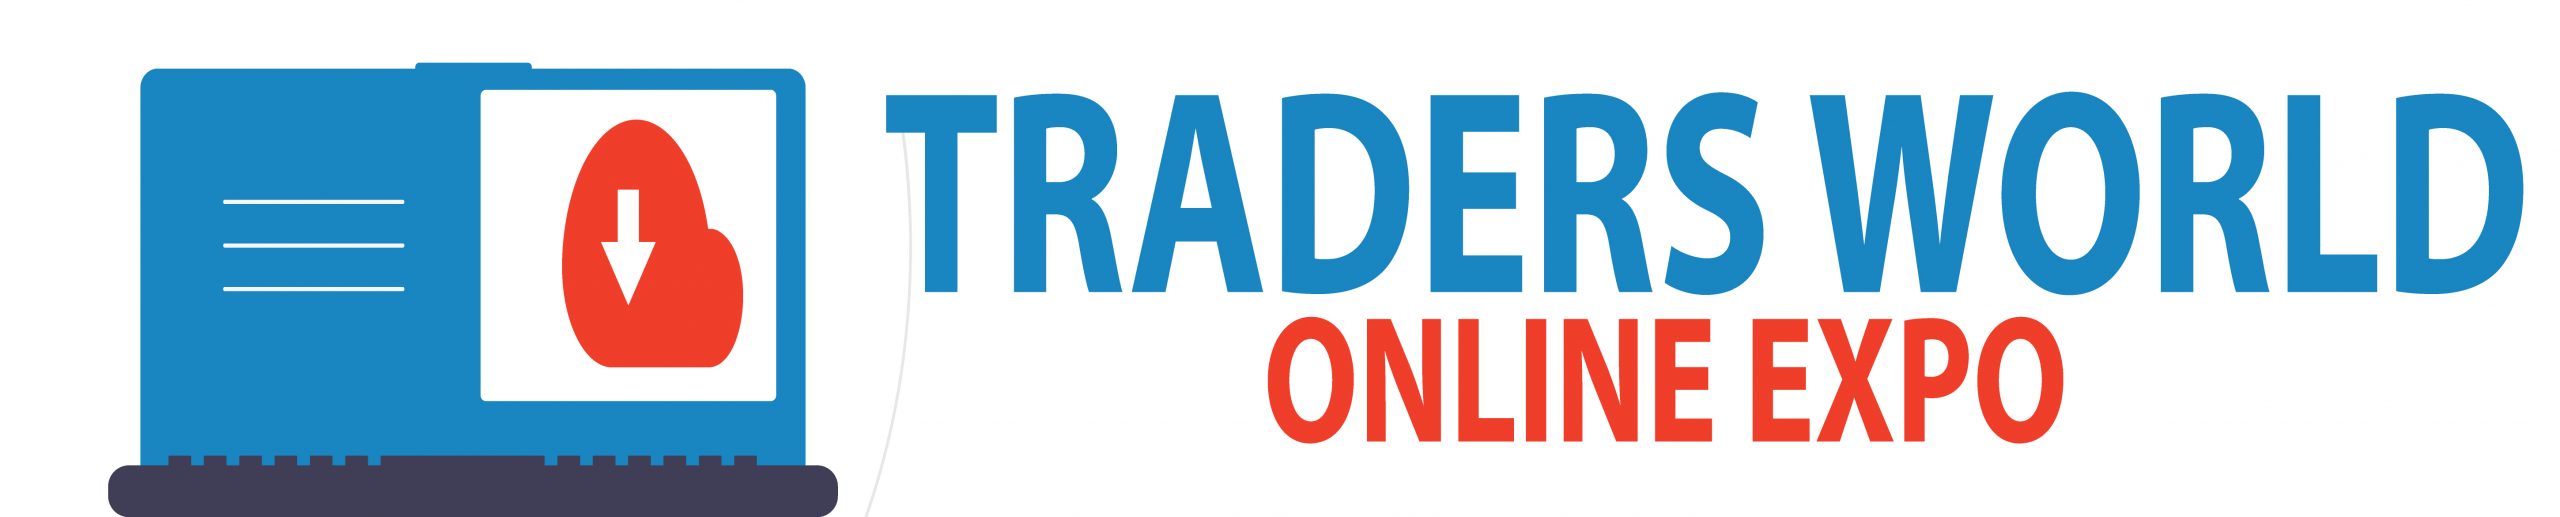 Traders World Online Expo